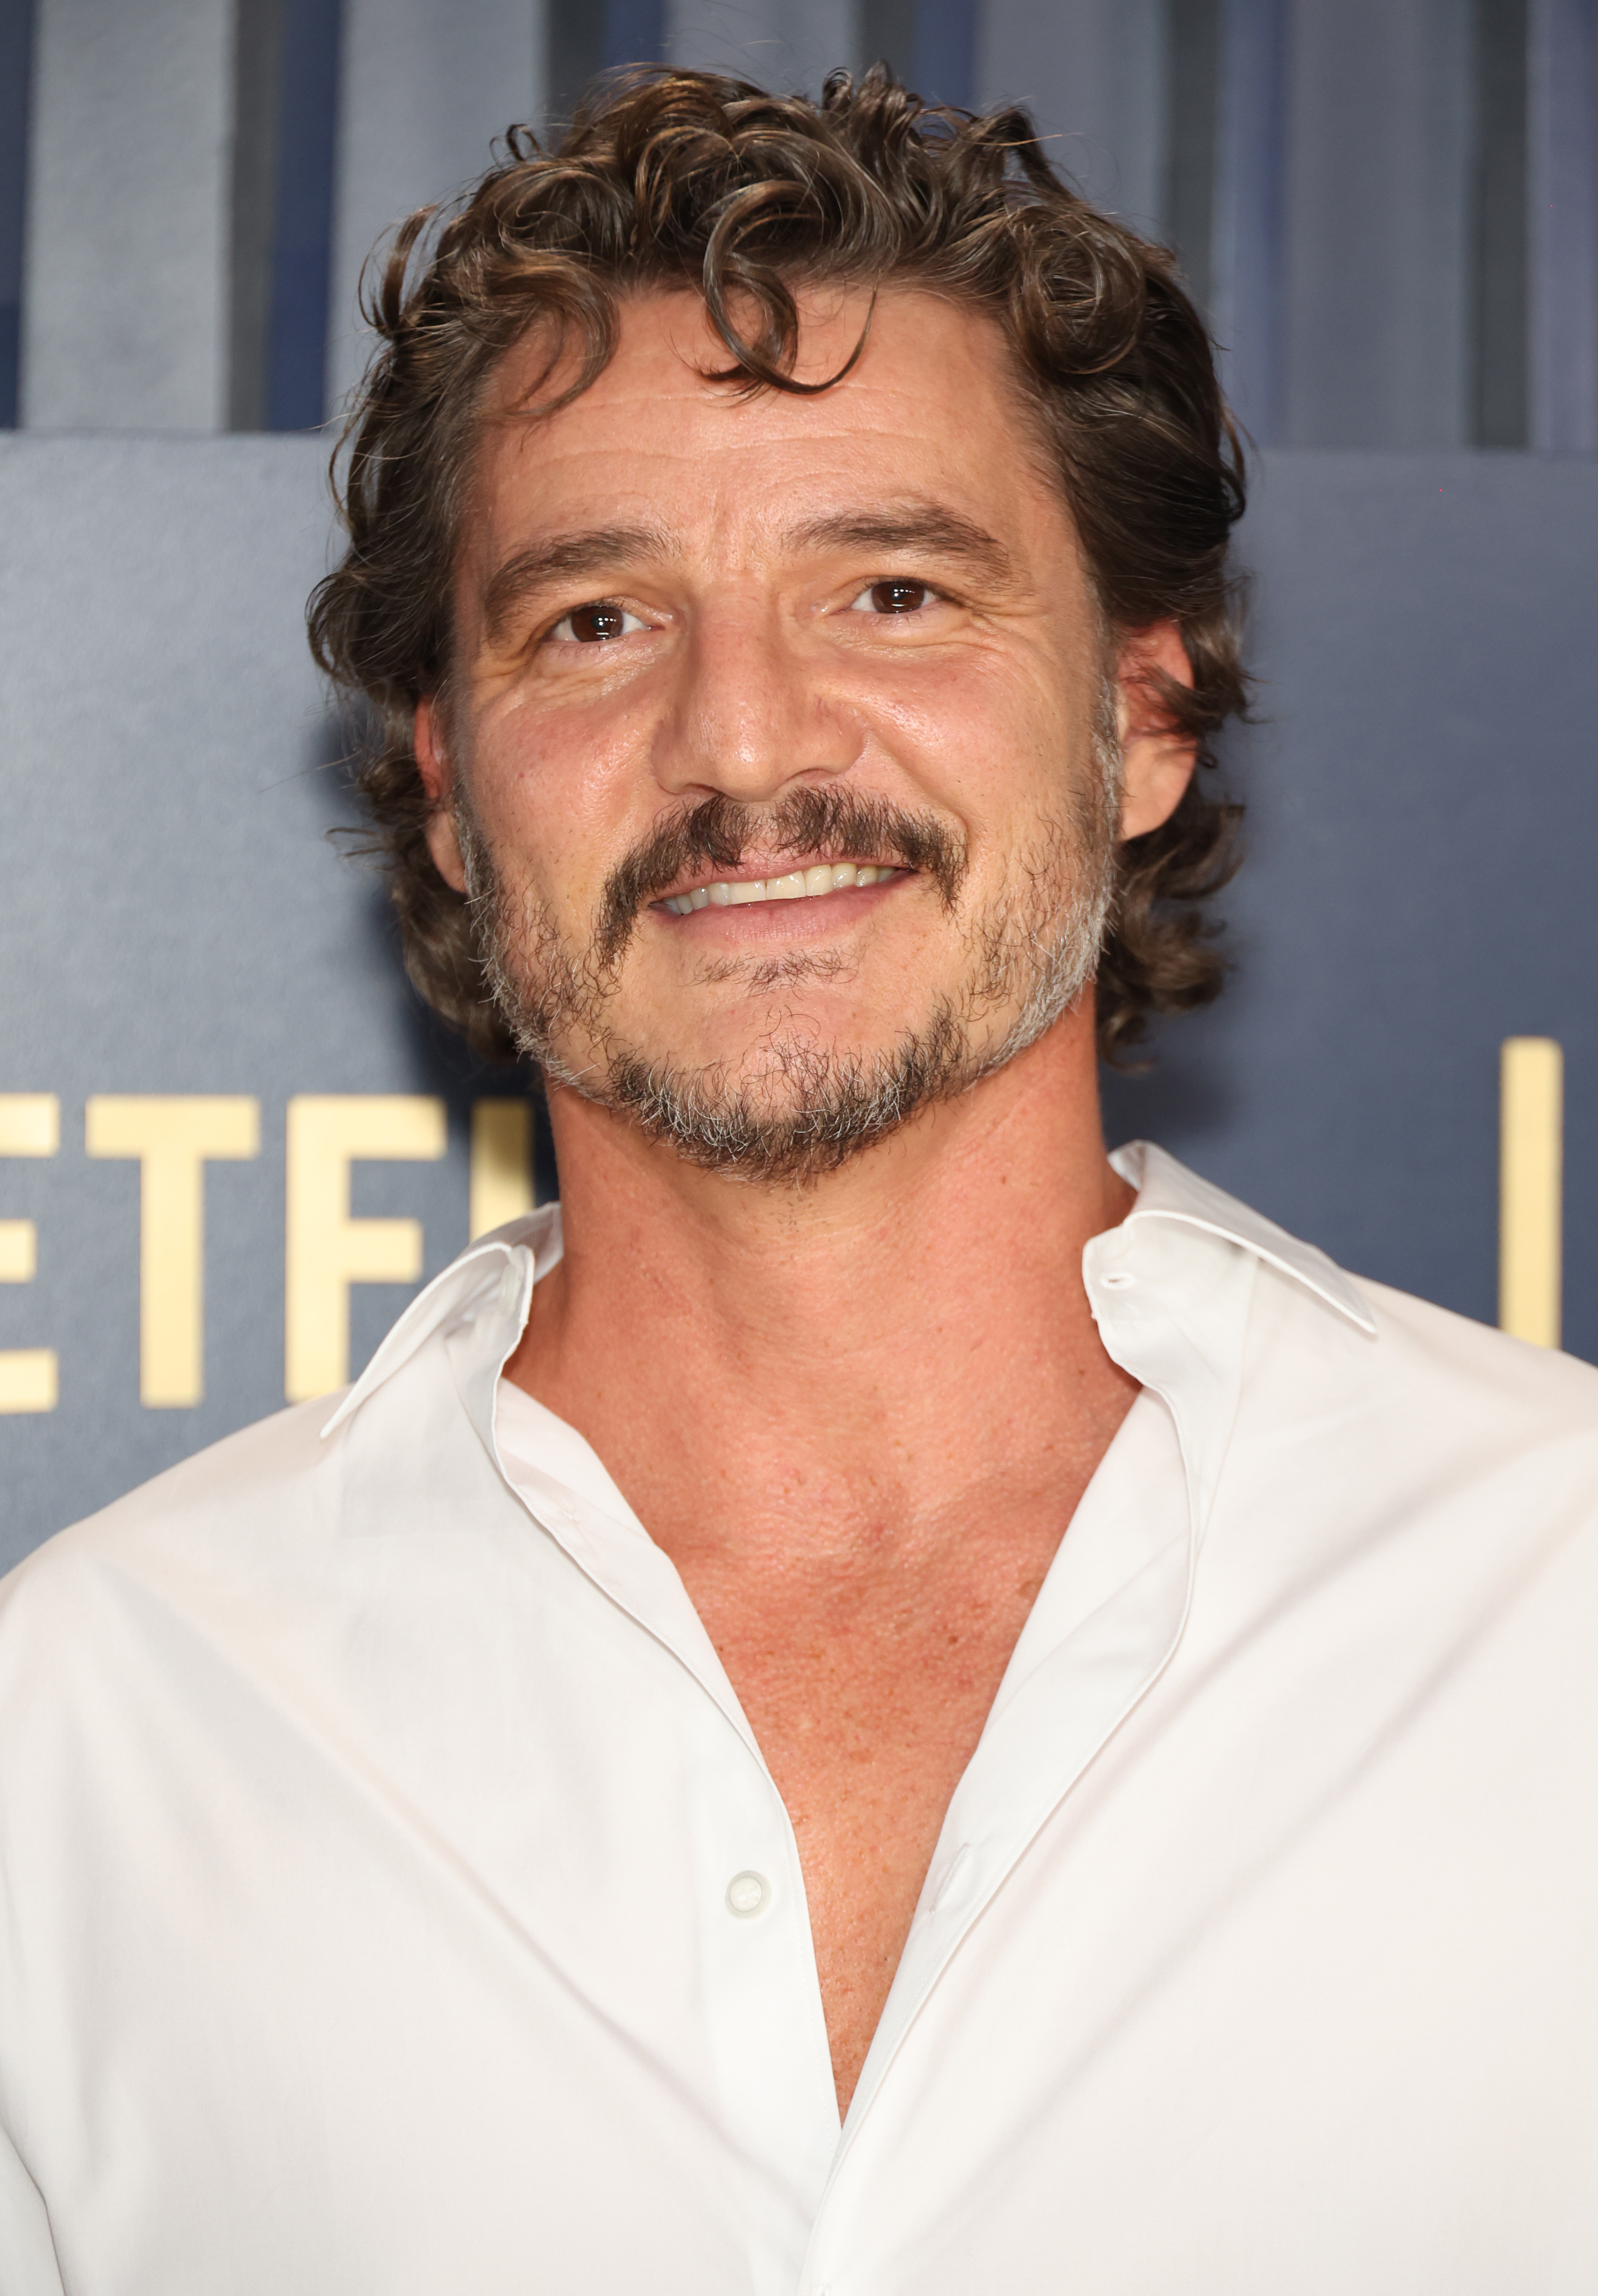 Pedro Pascal at an event, wearing a casual button-down shirt